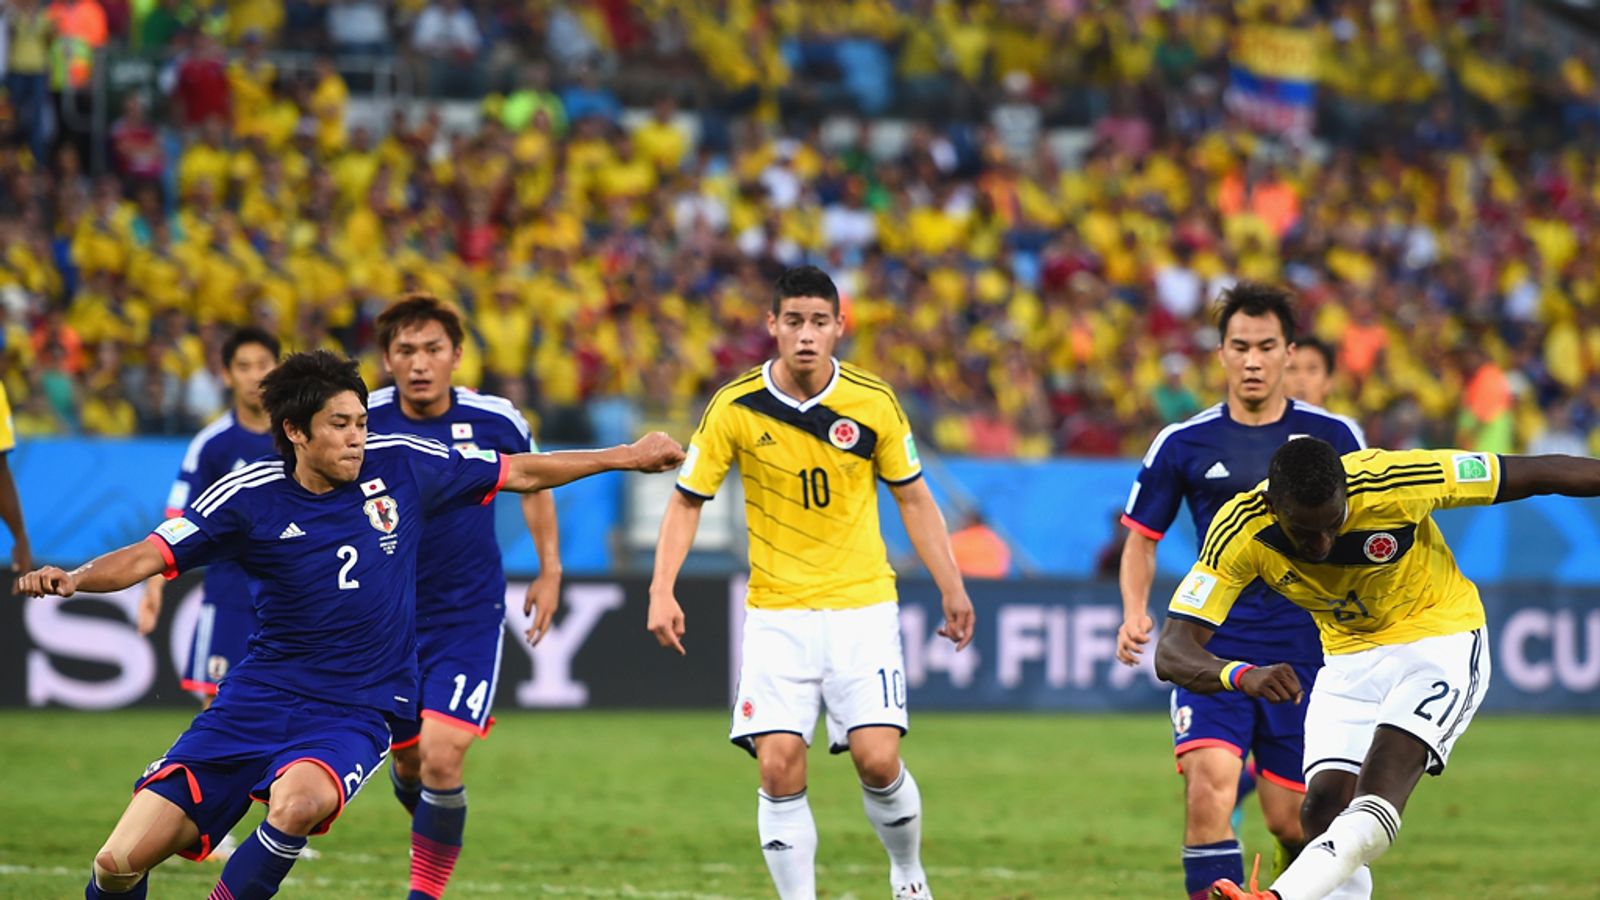 Japan 1 4 Colombia Match Report & Highlights